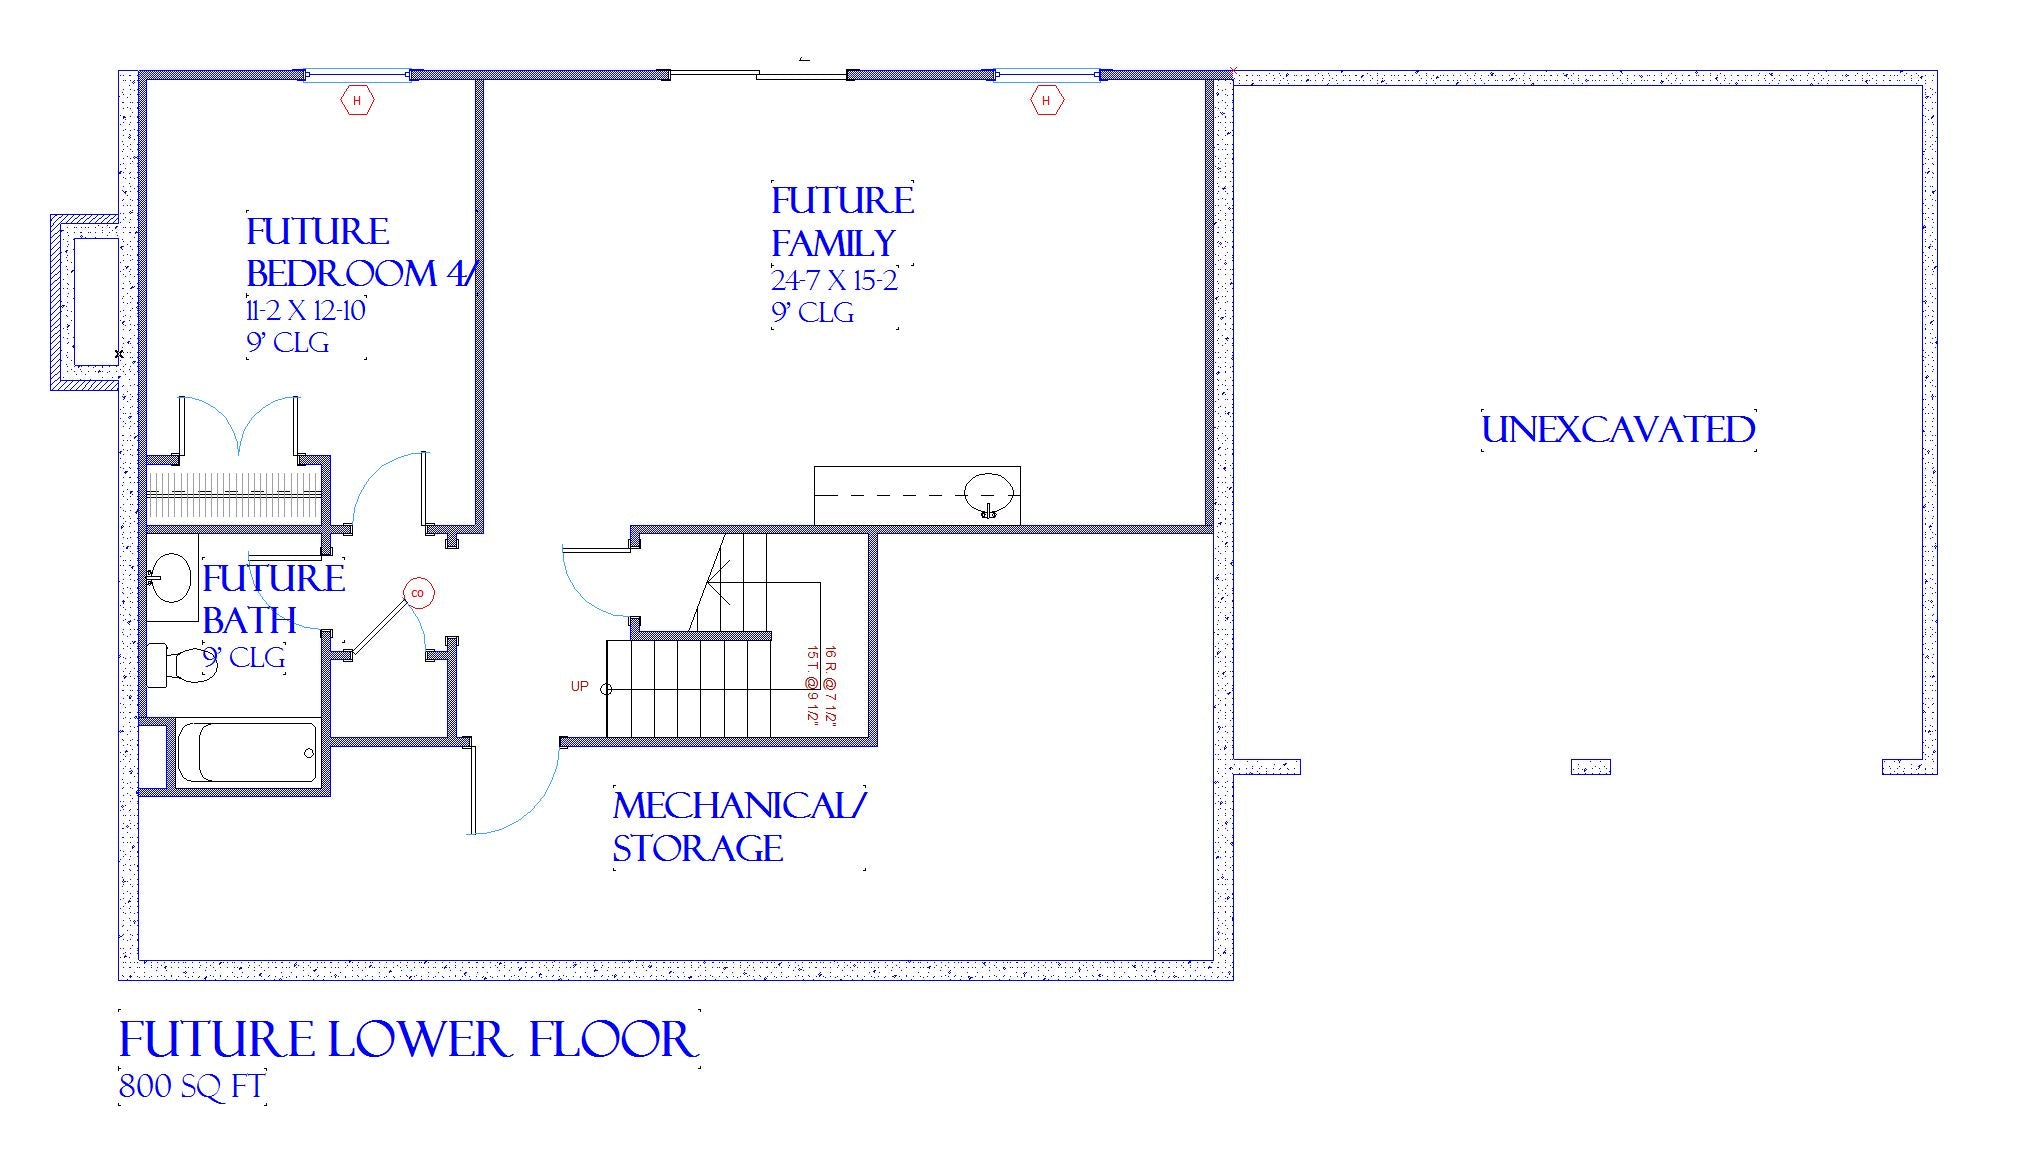 Floral - Home Design and Floor Plan - SketchPad House Plans